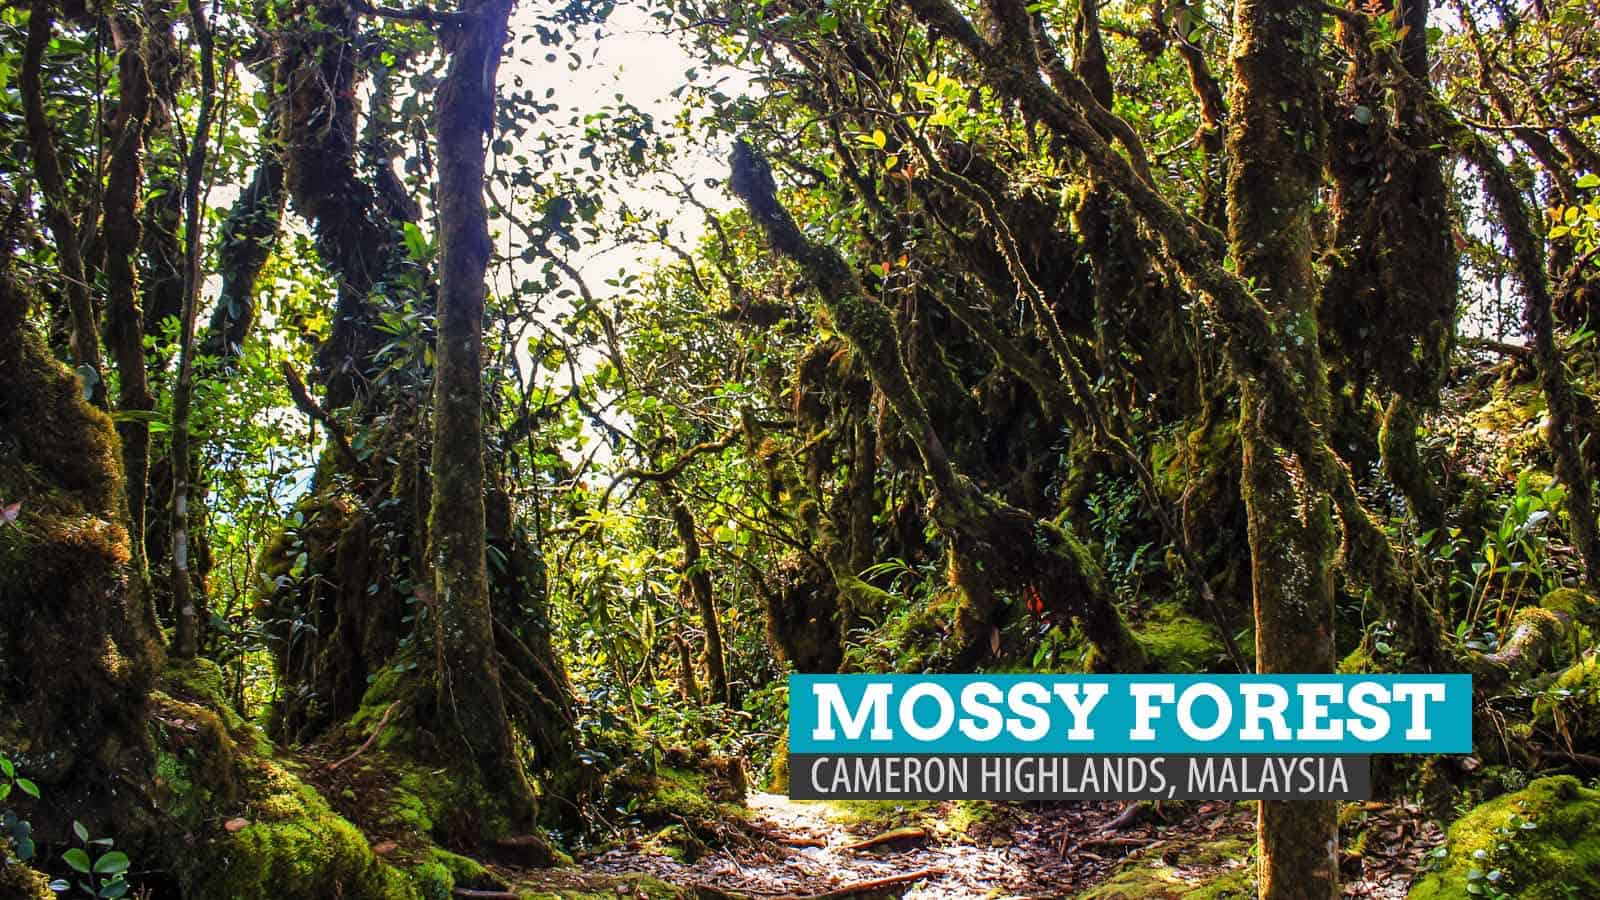 The Mossy Forest of Gunung Brinchang: Cameron Highlands, Malaysia